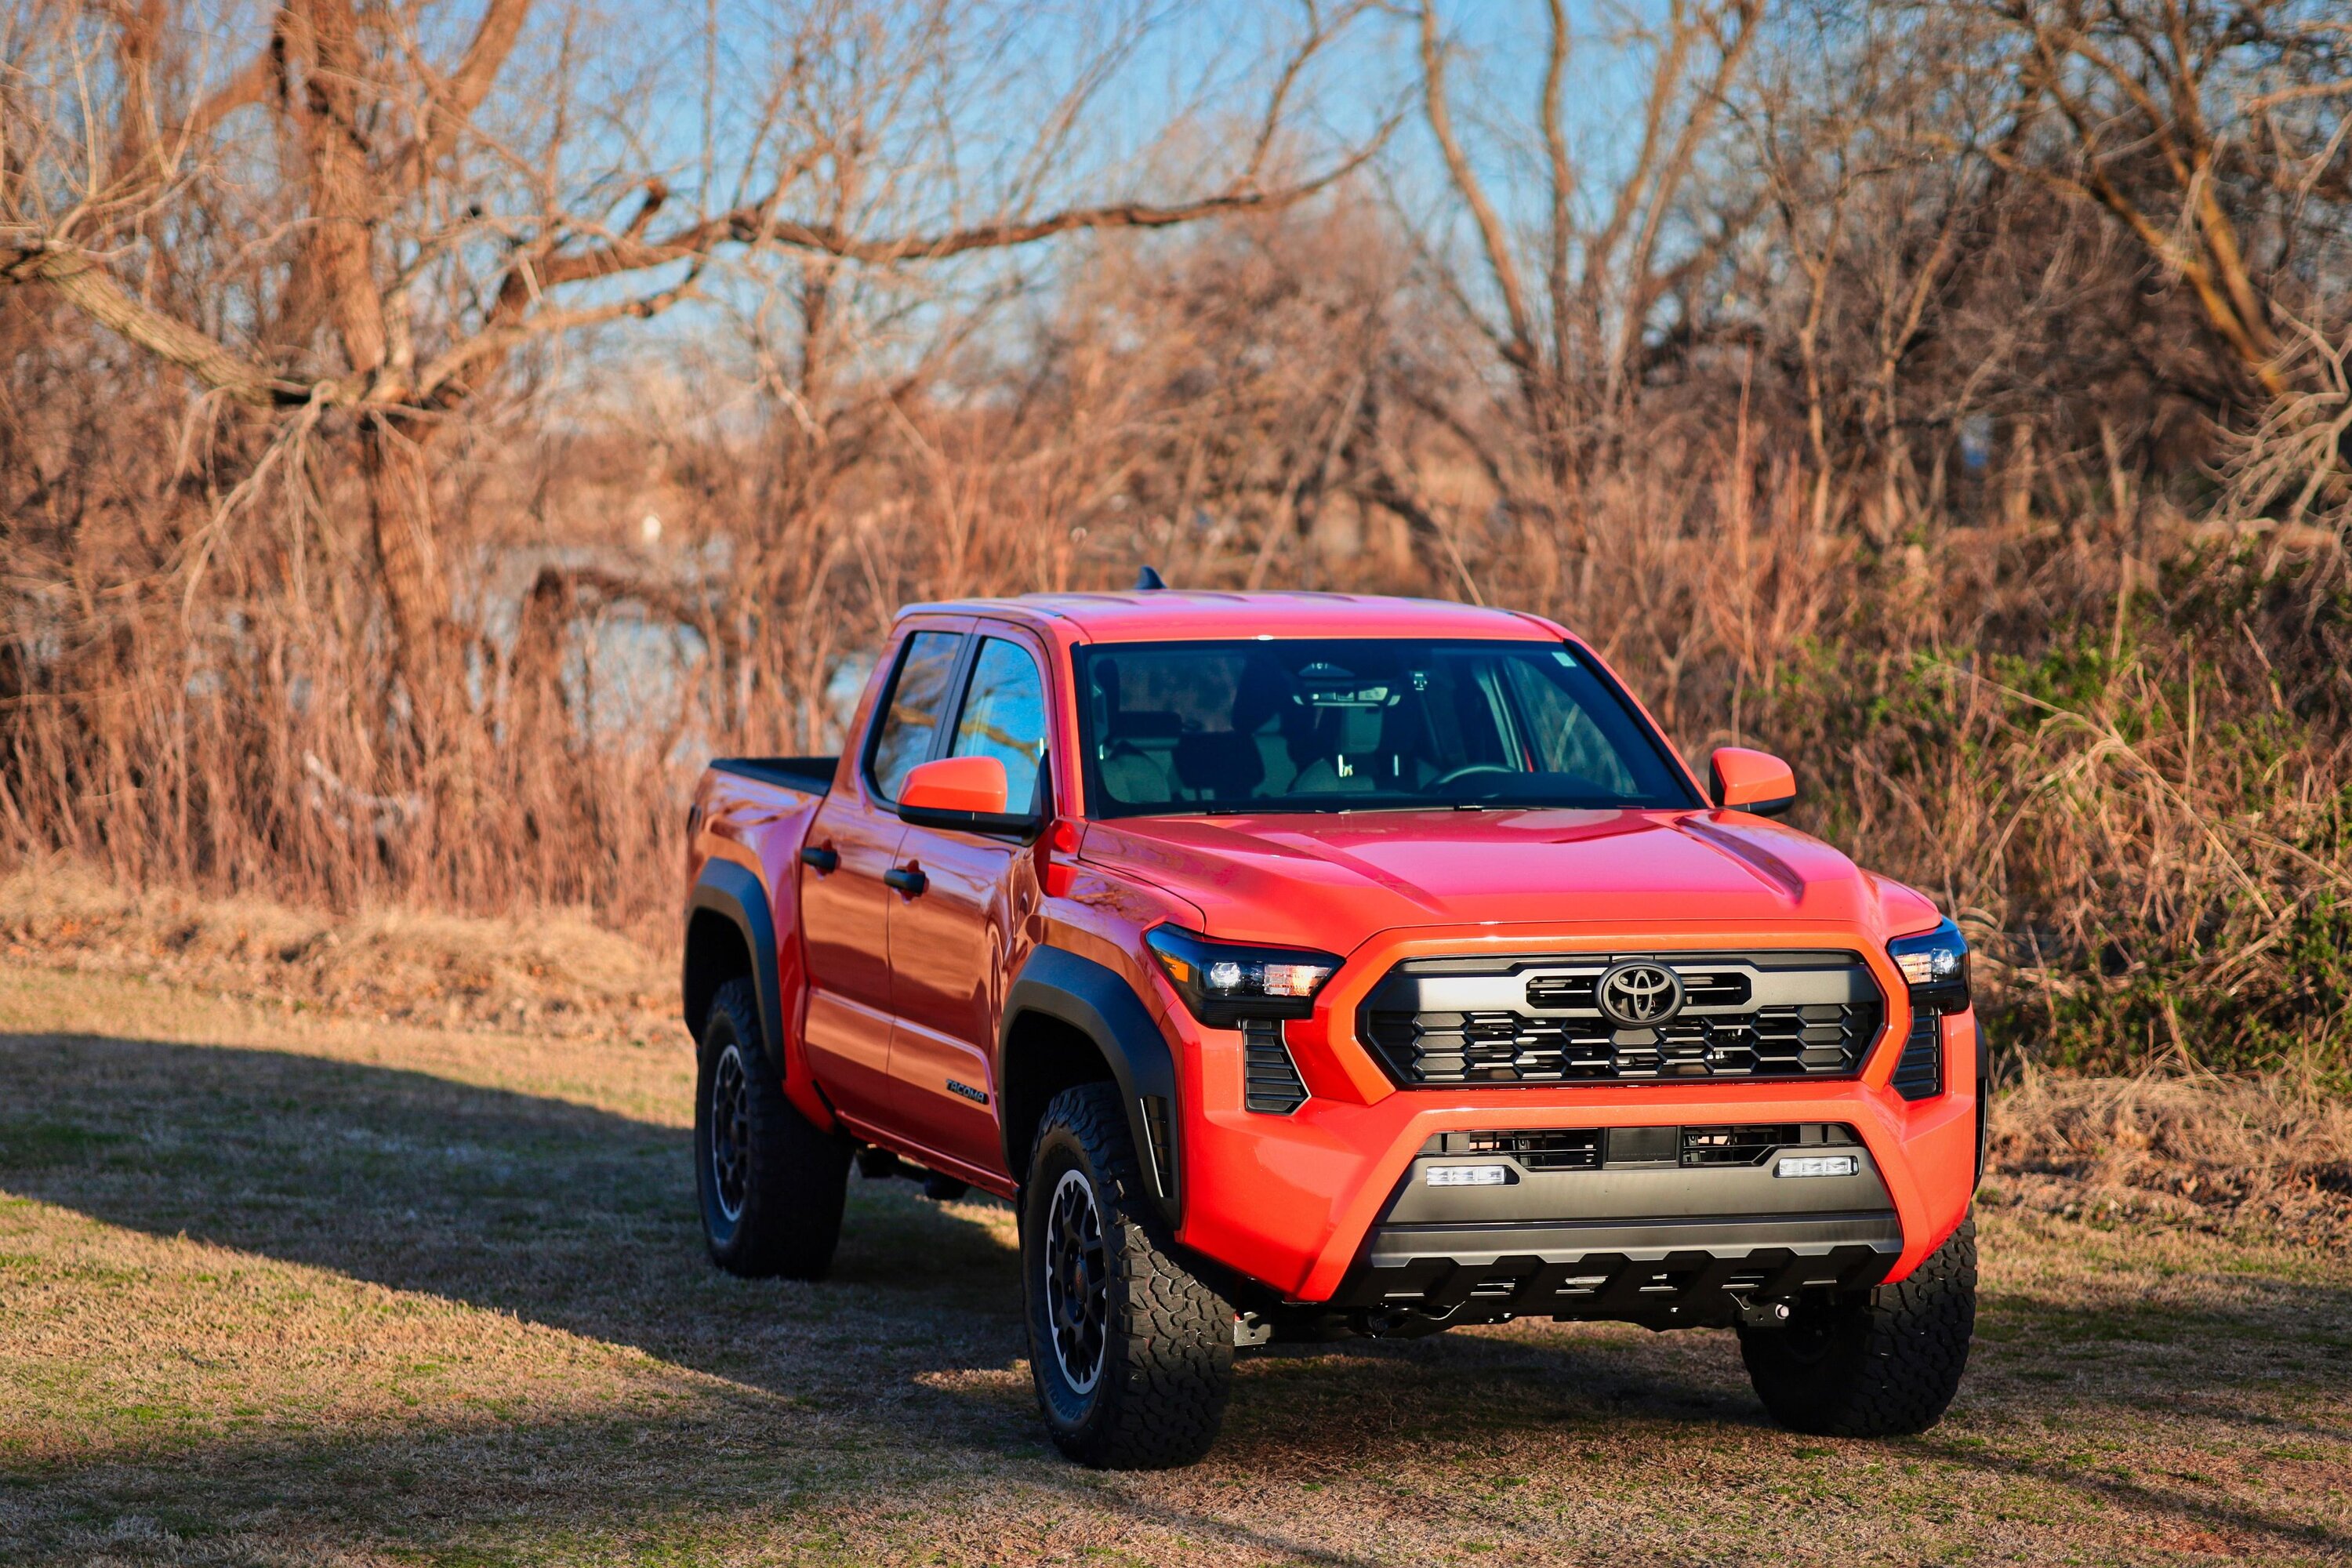 2024 Tacoma Random 2024 Tacoma 4th Gen Photos of the Day - Post Yours! 📸 🤳 axyYSCm